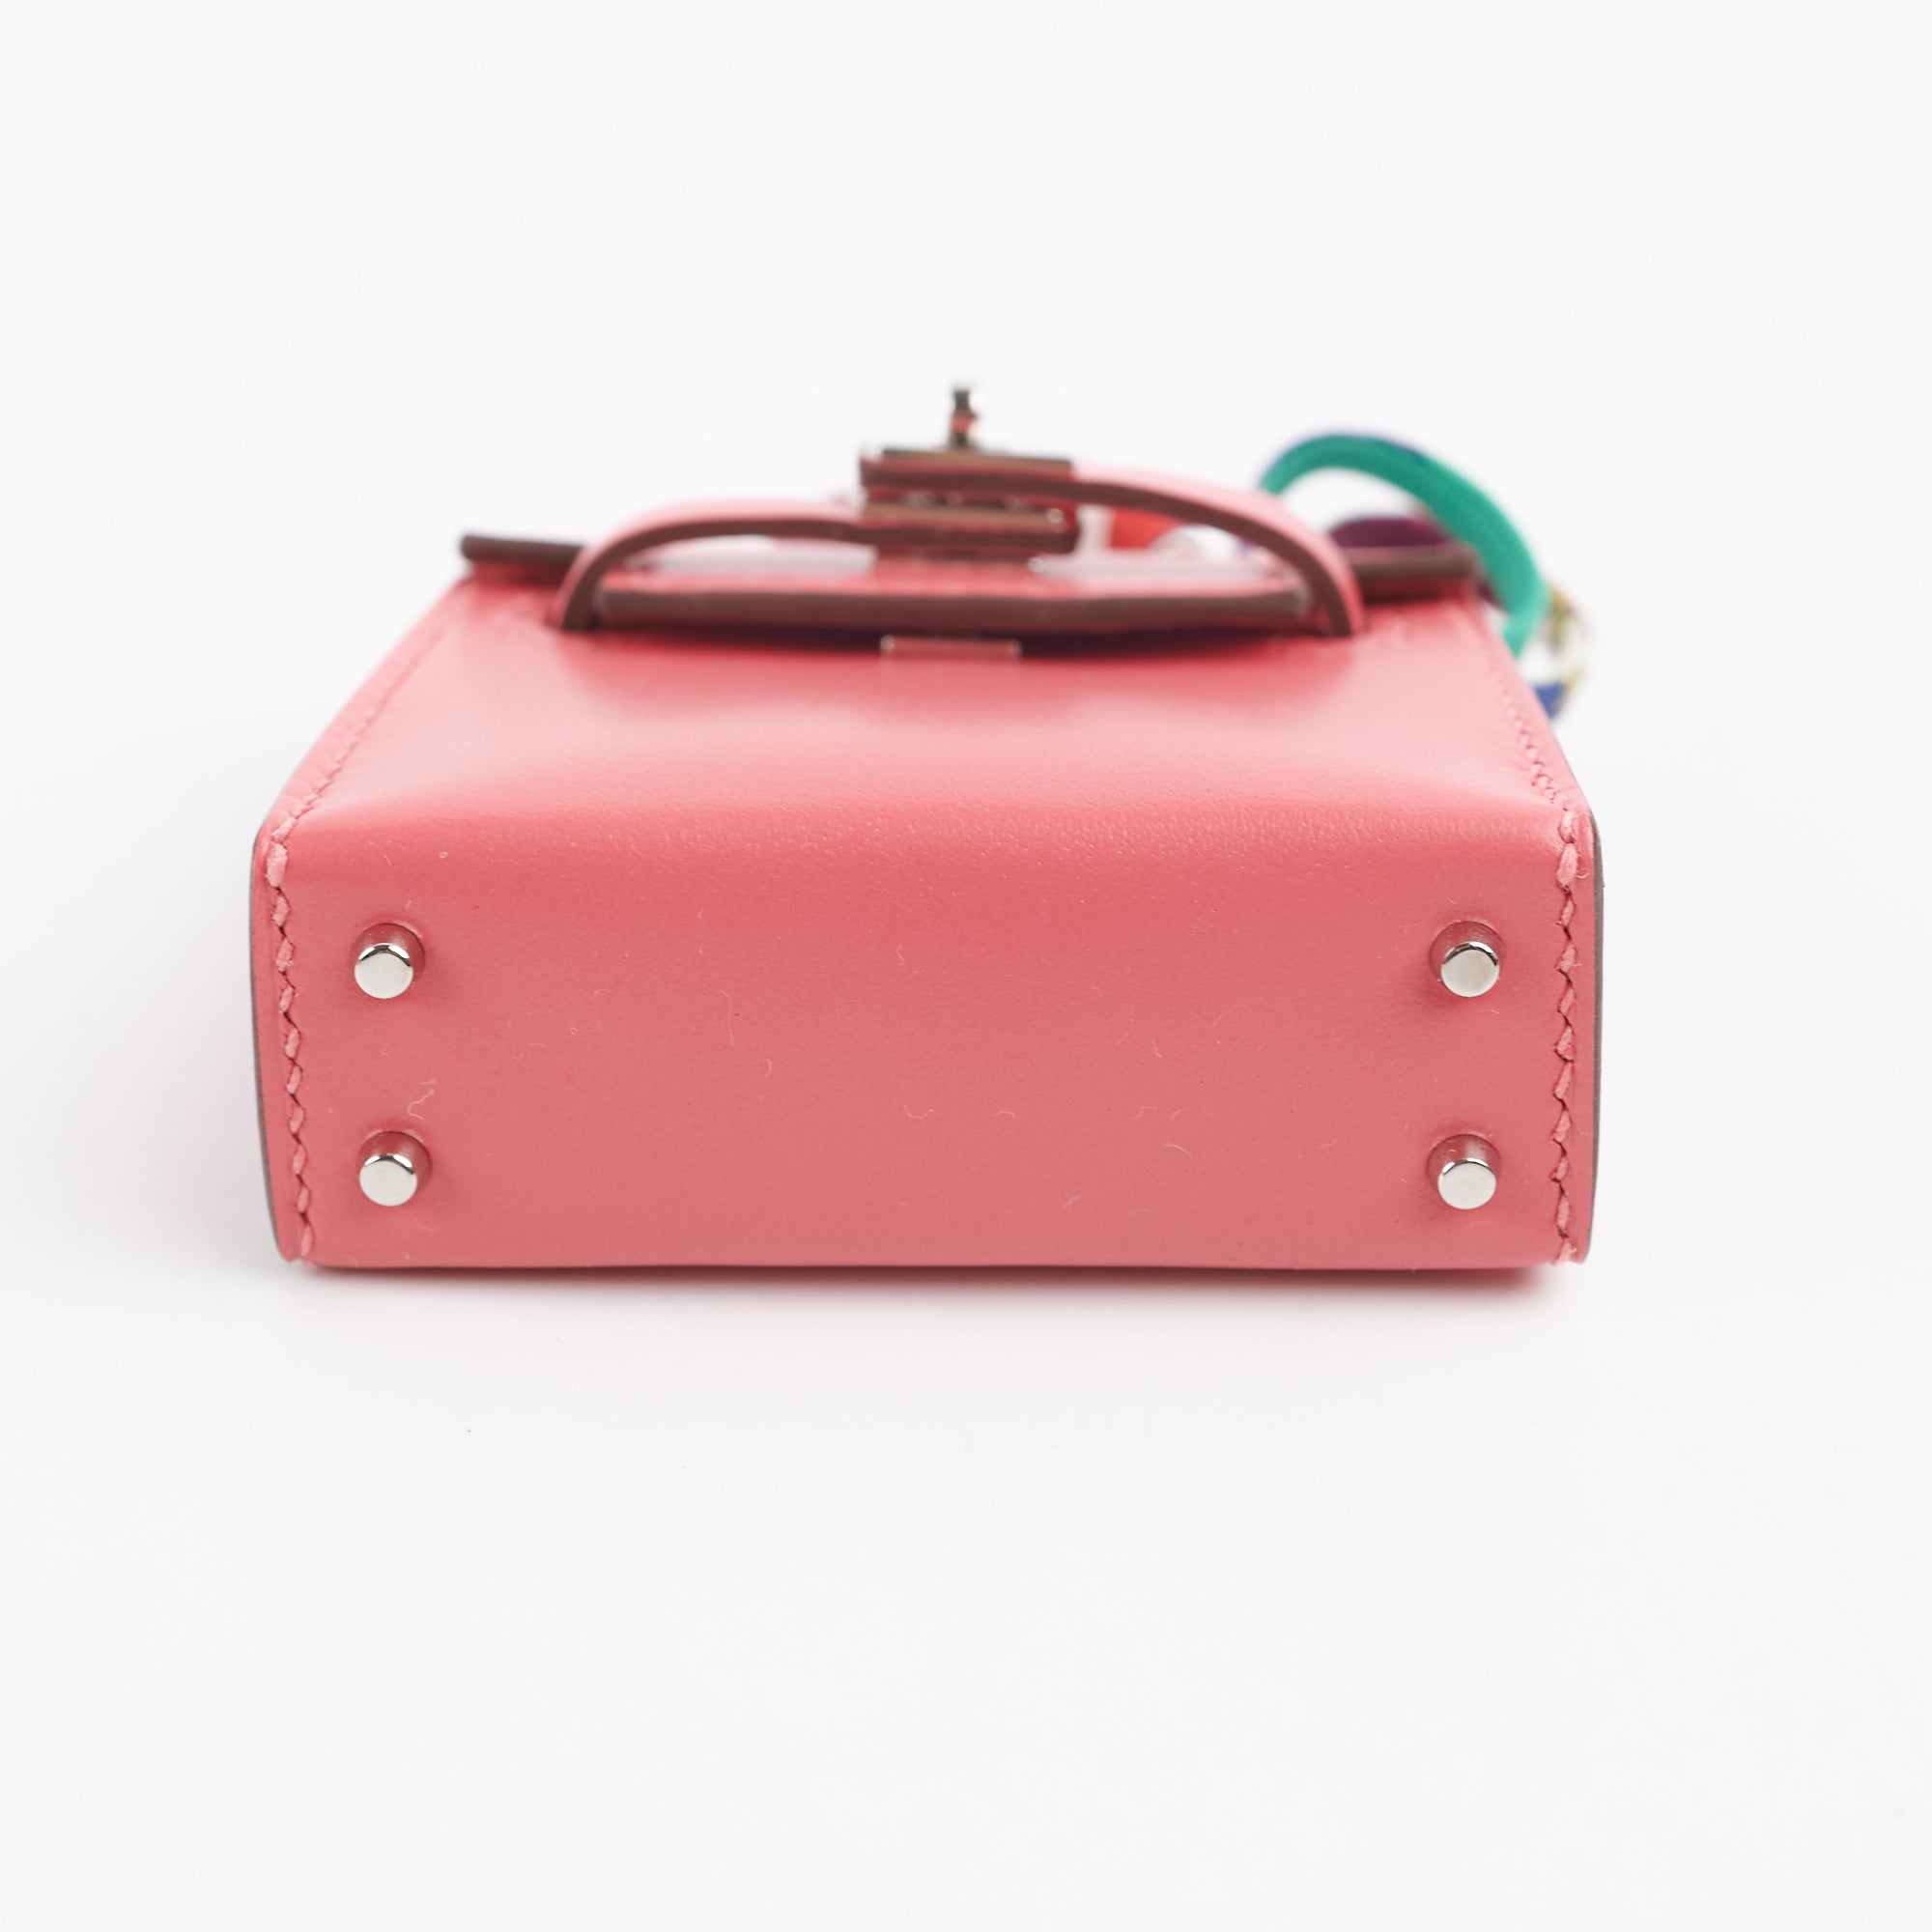 Hermes Mini Kelly Twilly Bag Charm In Lipstick Pink And Gold